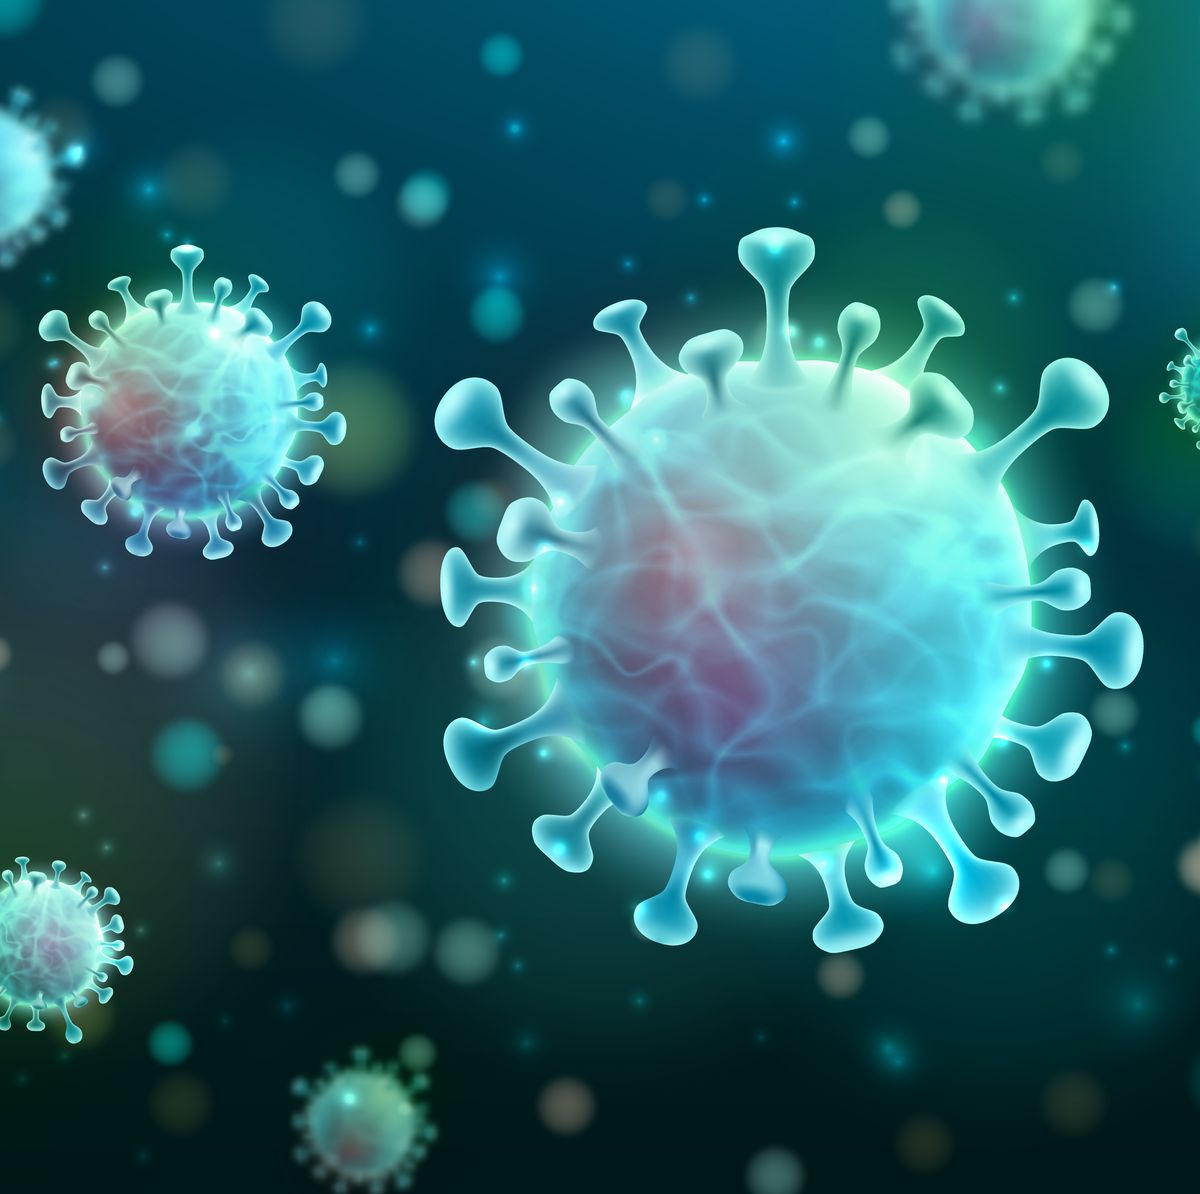 vector of coronavirus 2019 ncov and virus background with disease cells covid 19 corona virus outbreaking and pandemic medical health risk concept vector illustration eps 10